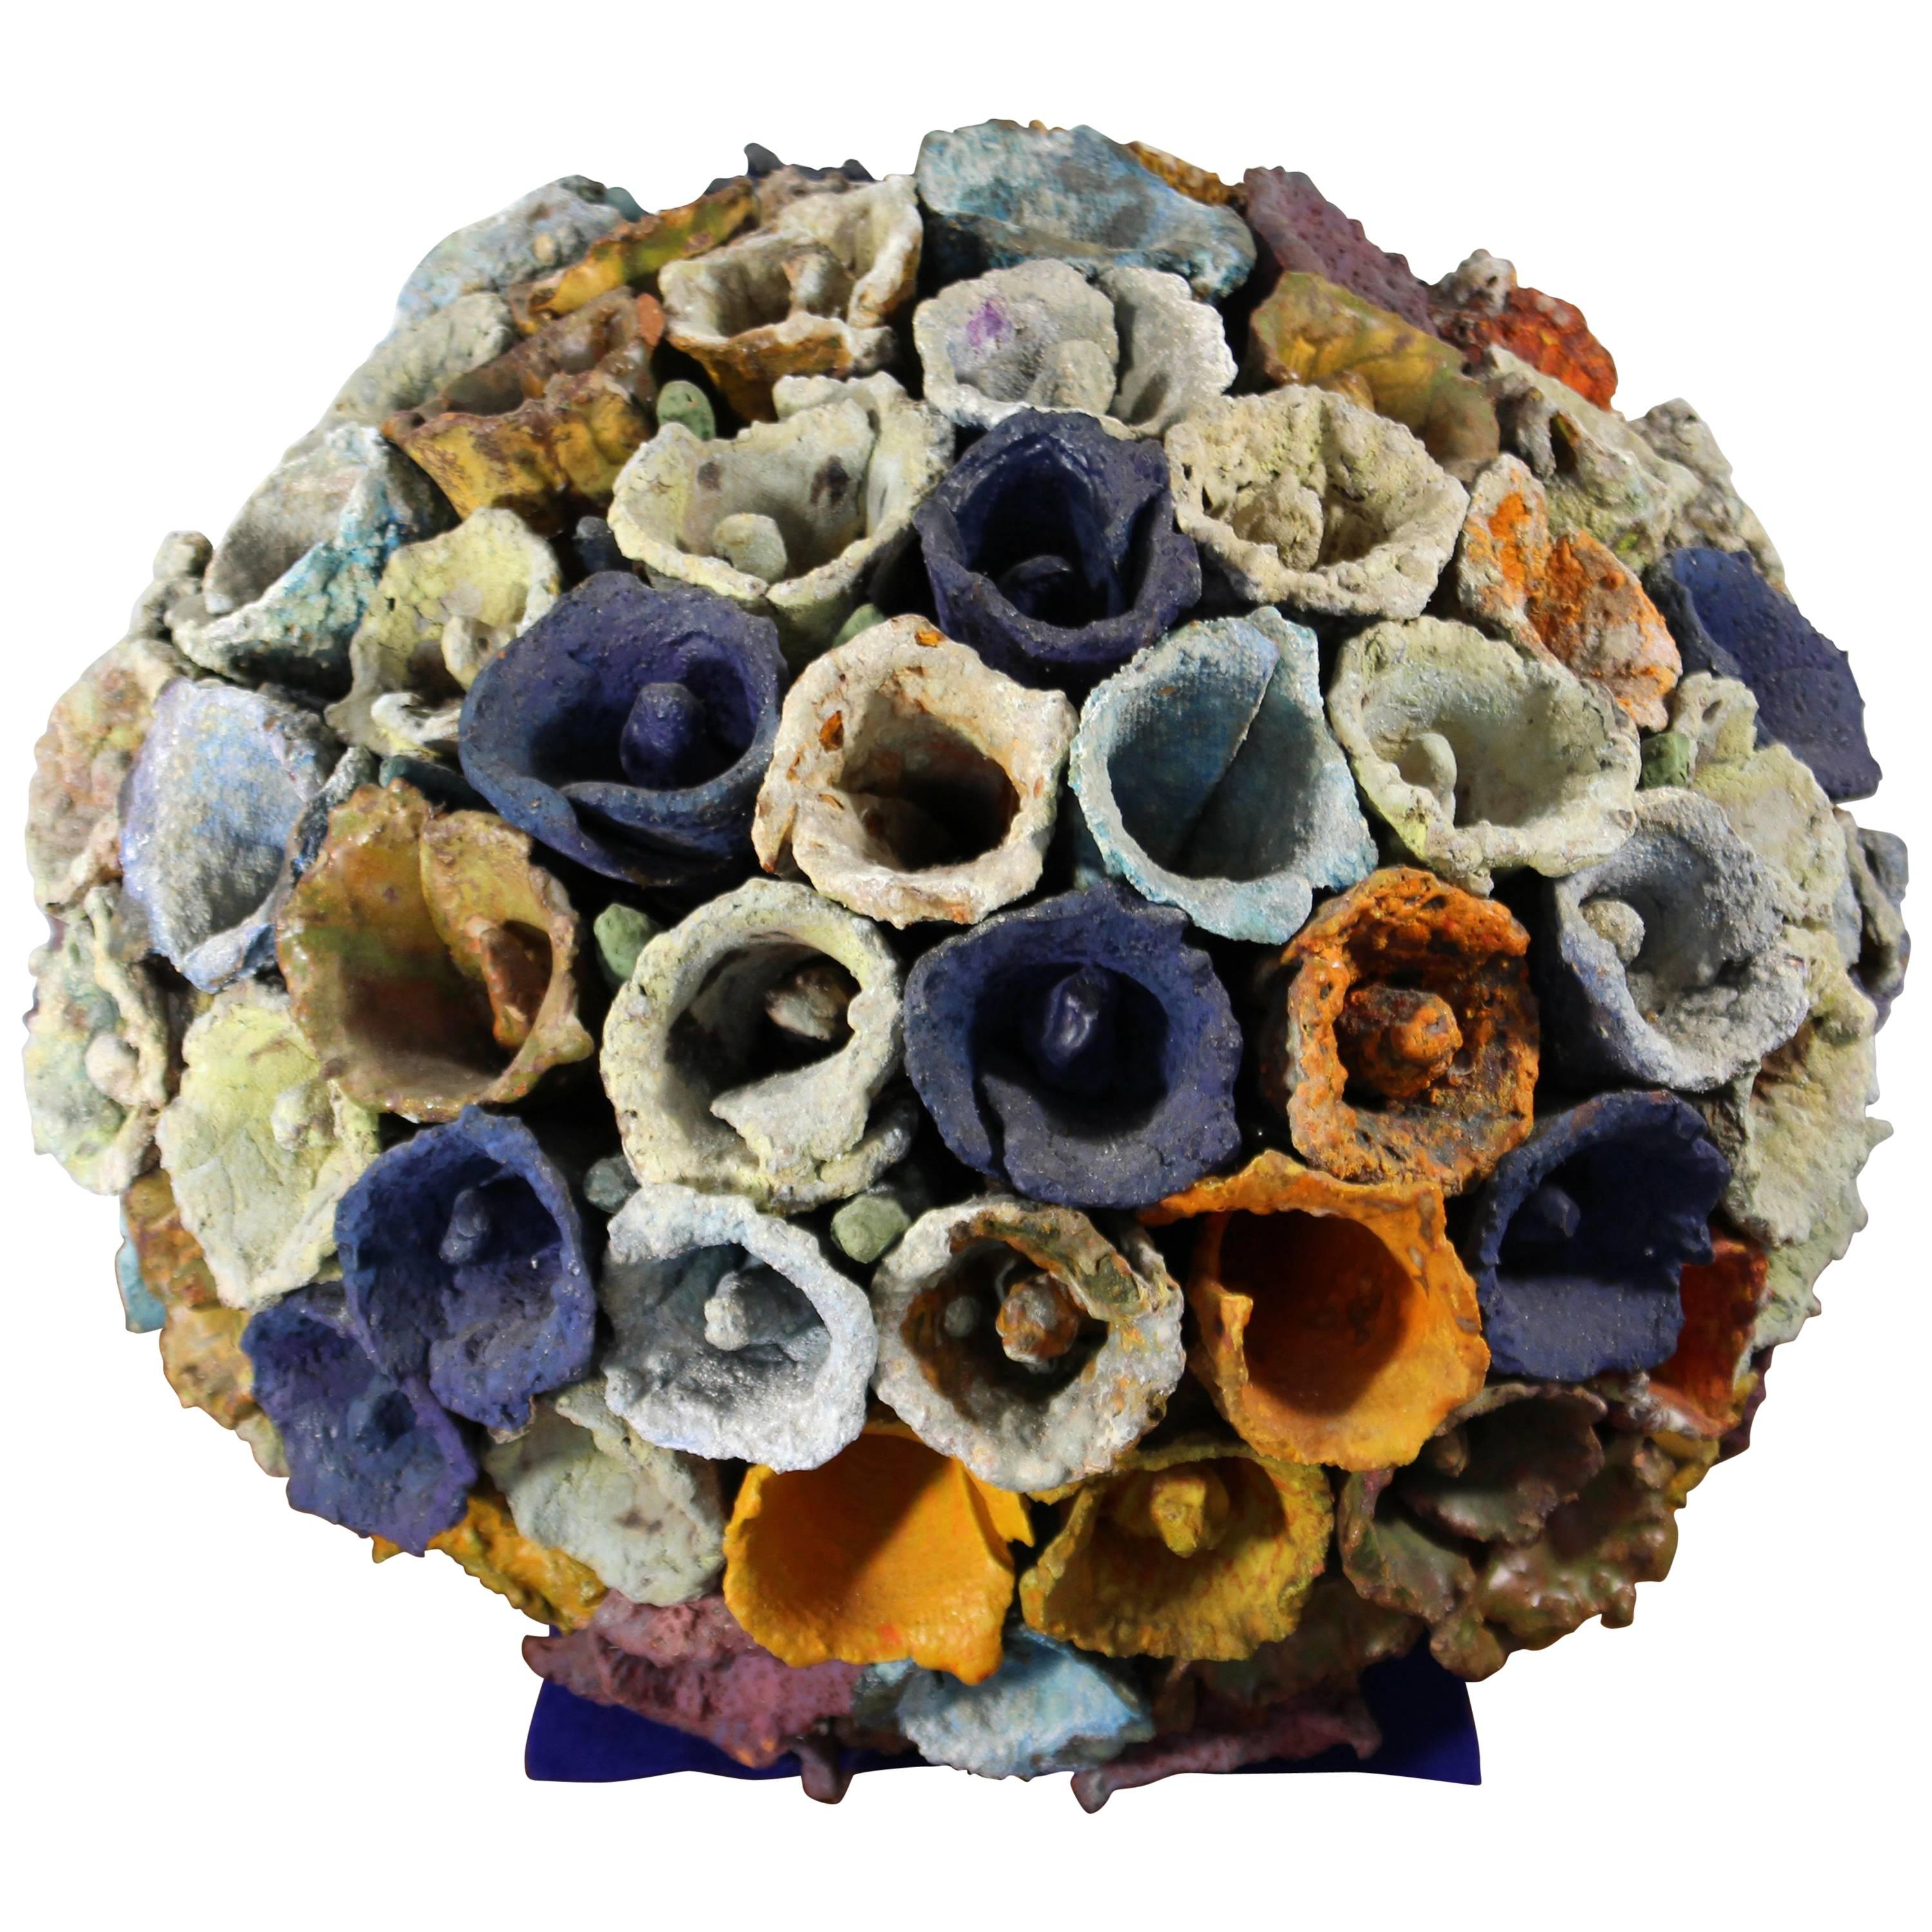 Contemporary Modern Sphere of Cones by Juanita May Textured Ceramic Sculpture